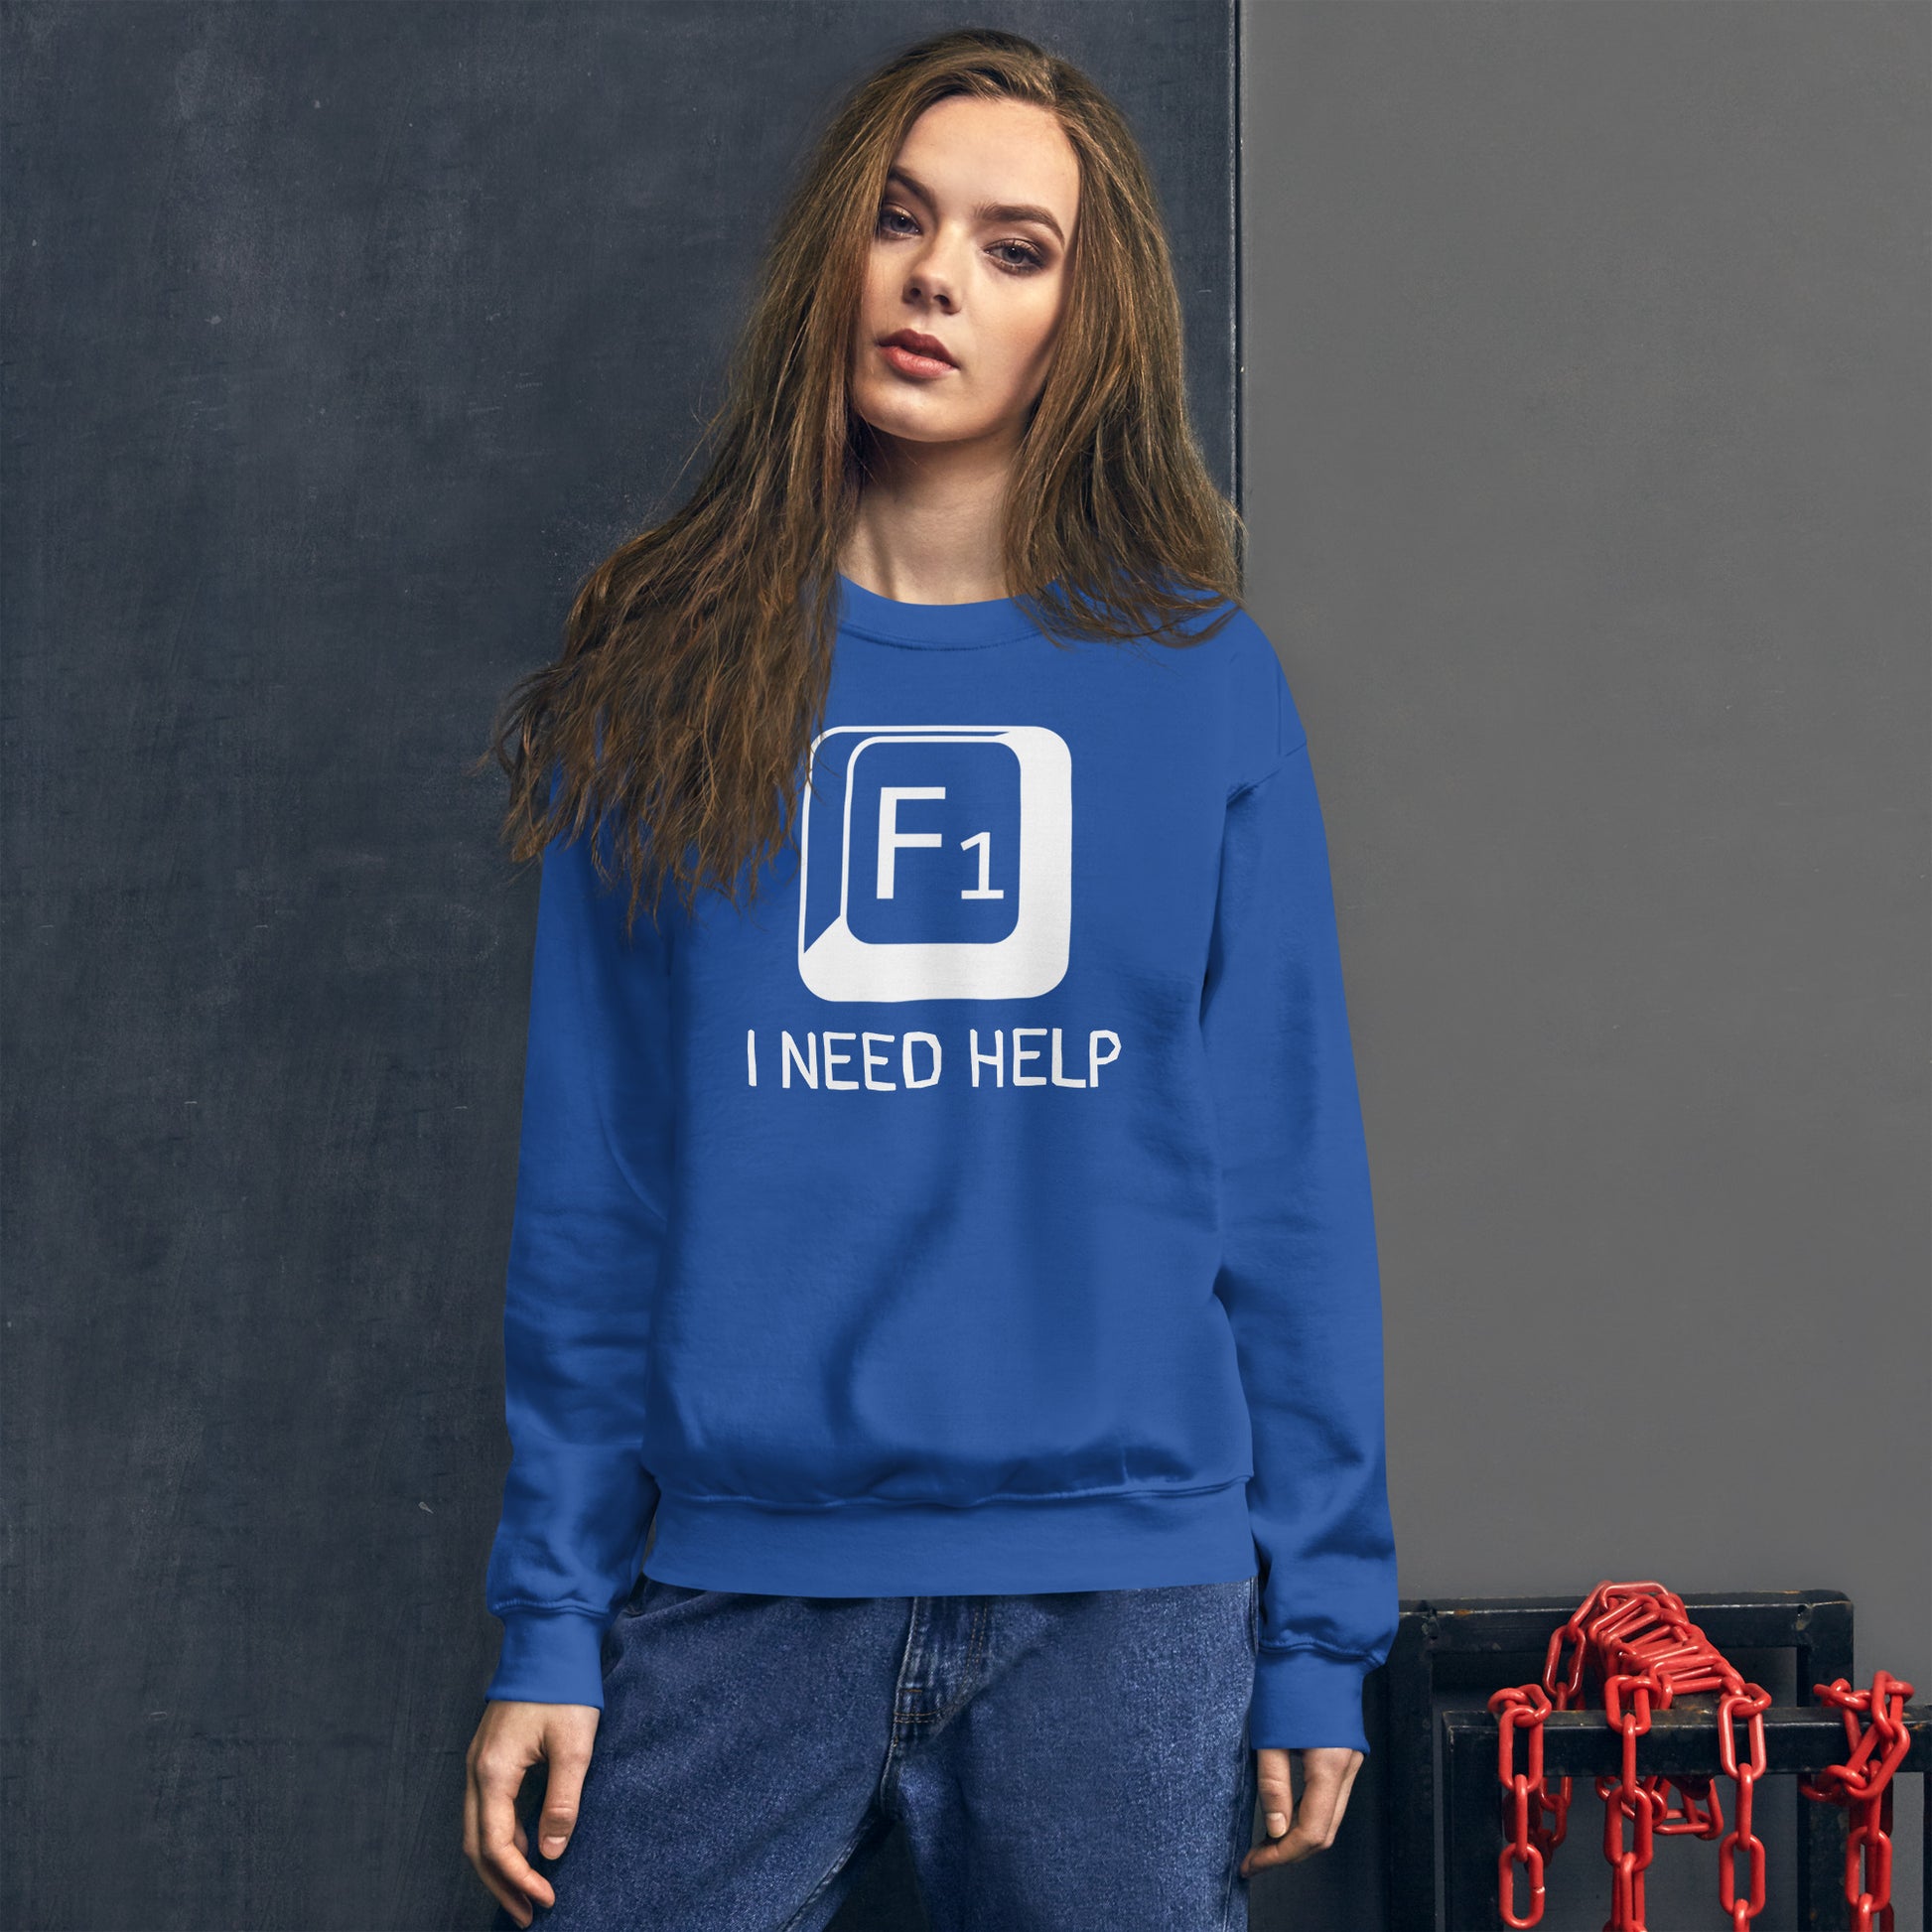 Women with royal blue sweatshirt and a picture of F1 key with text "I need help"